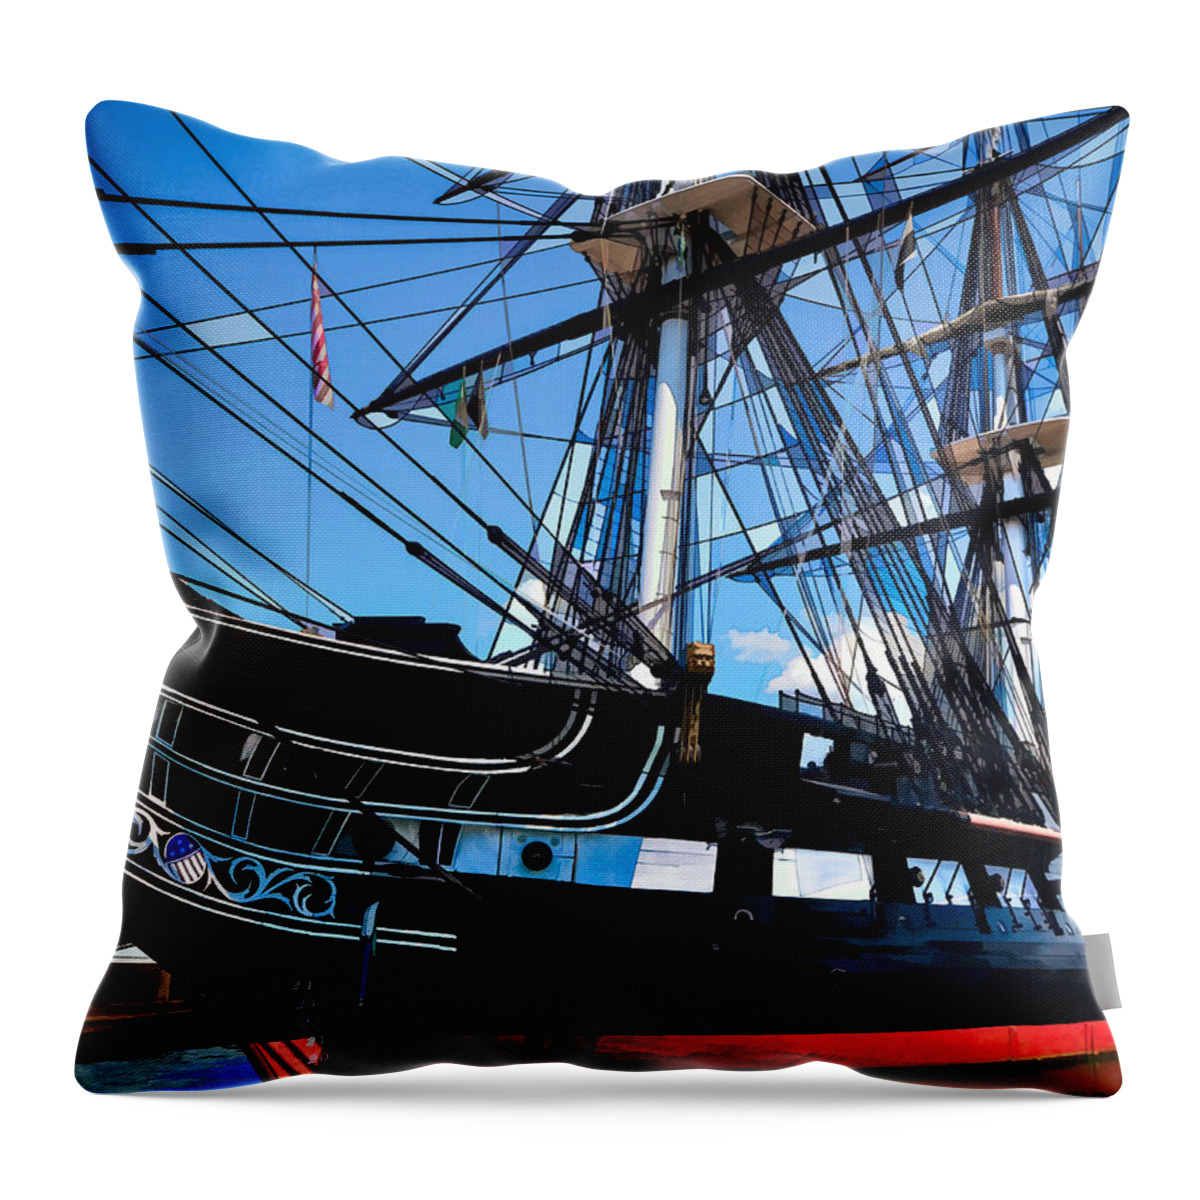 Stamp Treks Throw Pillow featuring the photograph Old Ironsides by David Thompsen